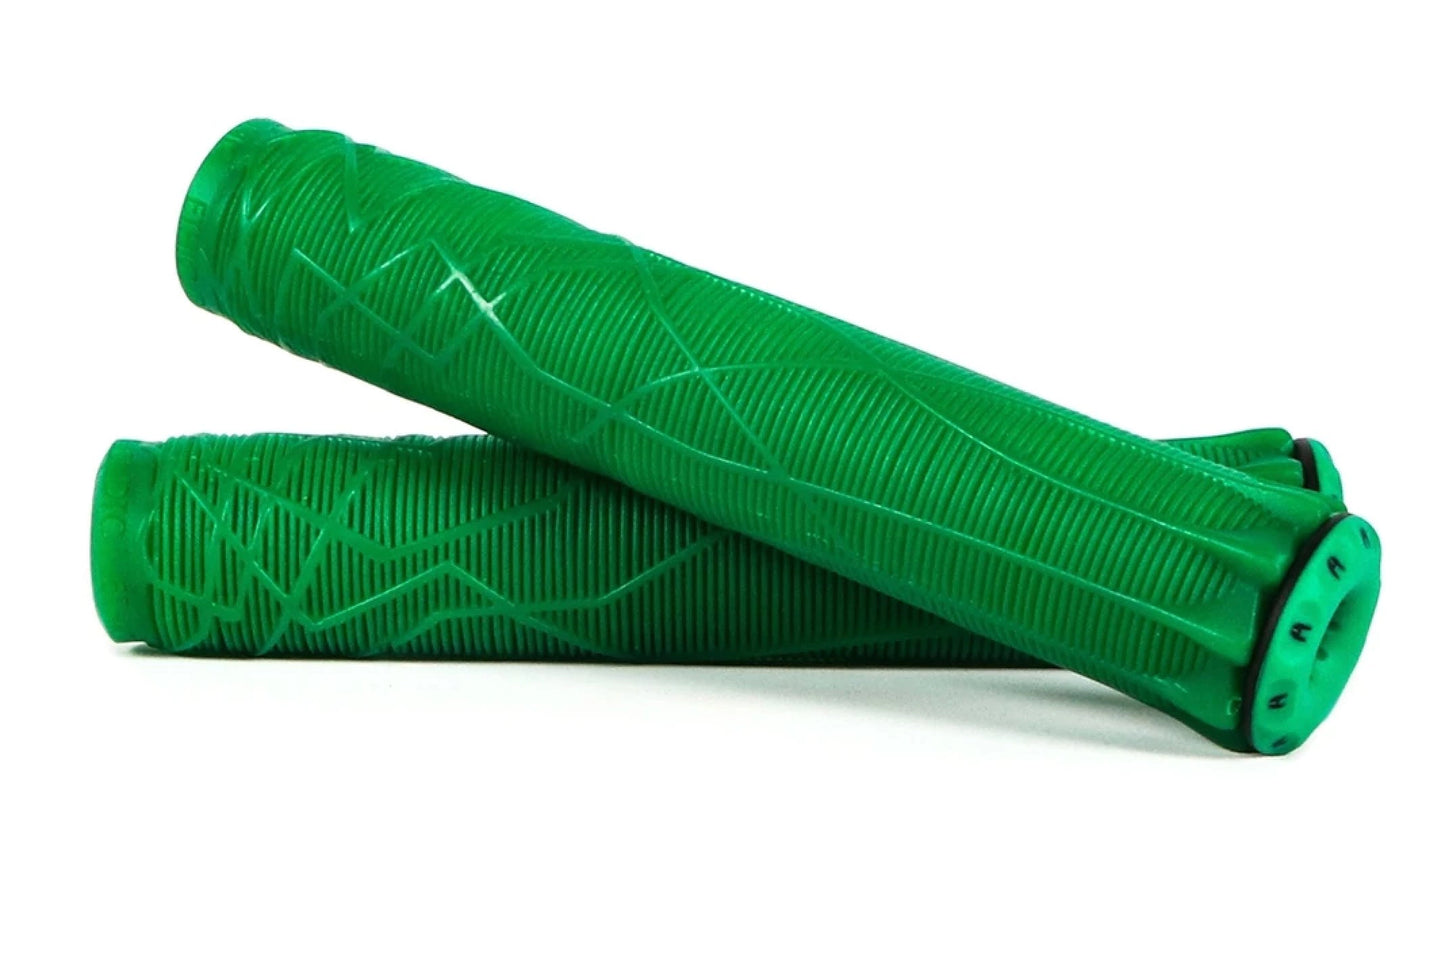 ethic-dtc-grips-rubber-green-trottinette-scooter